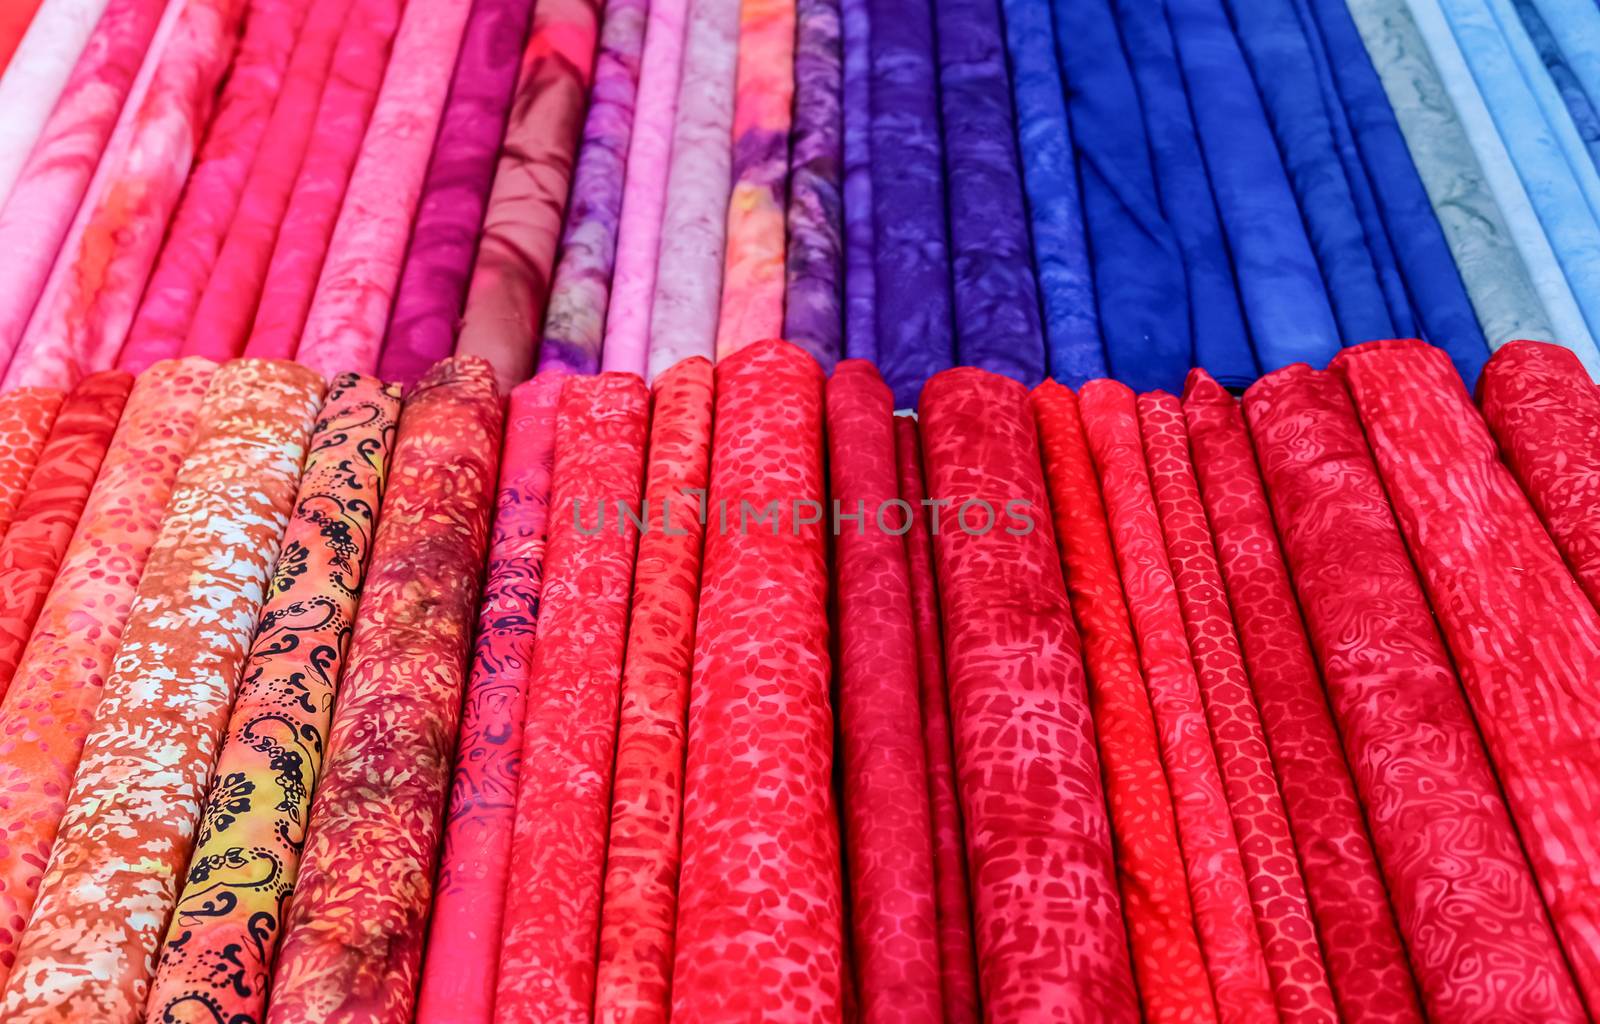 Detailed close up view on samples of cloth and fabrics in different colors found at a fabrics market.